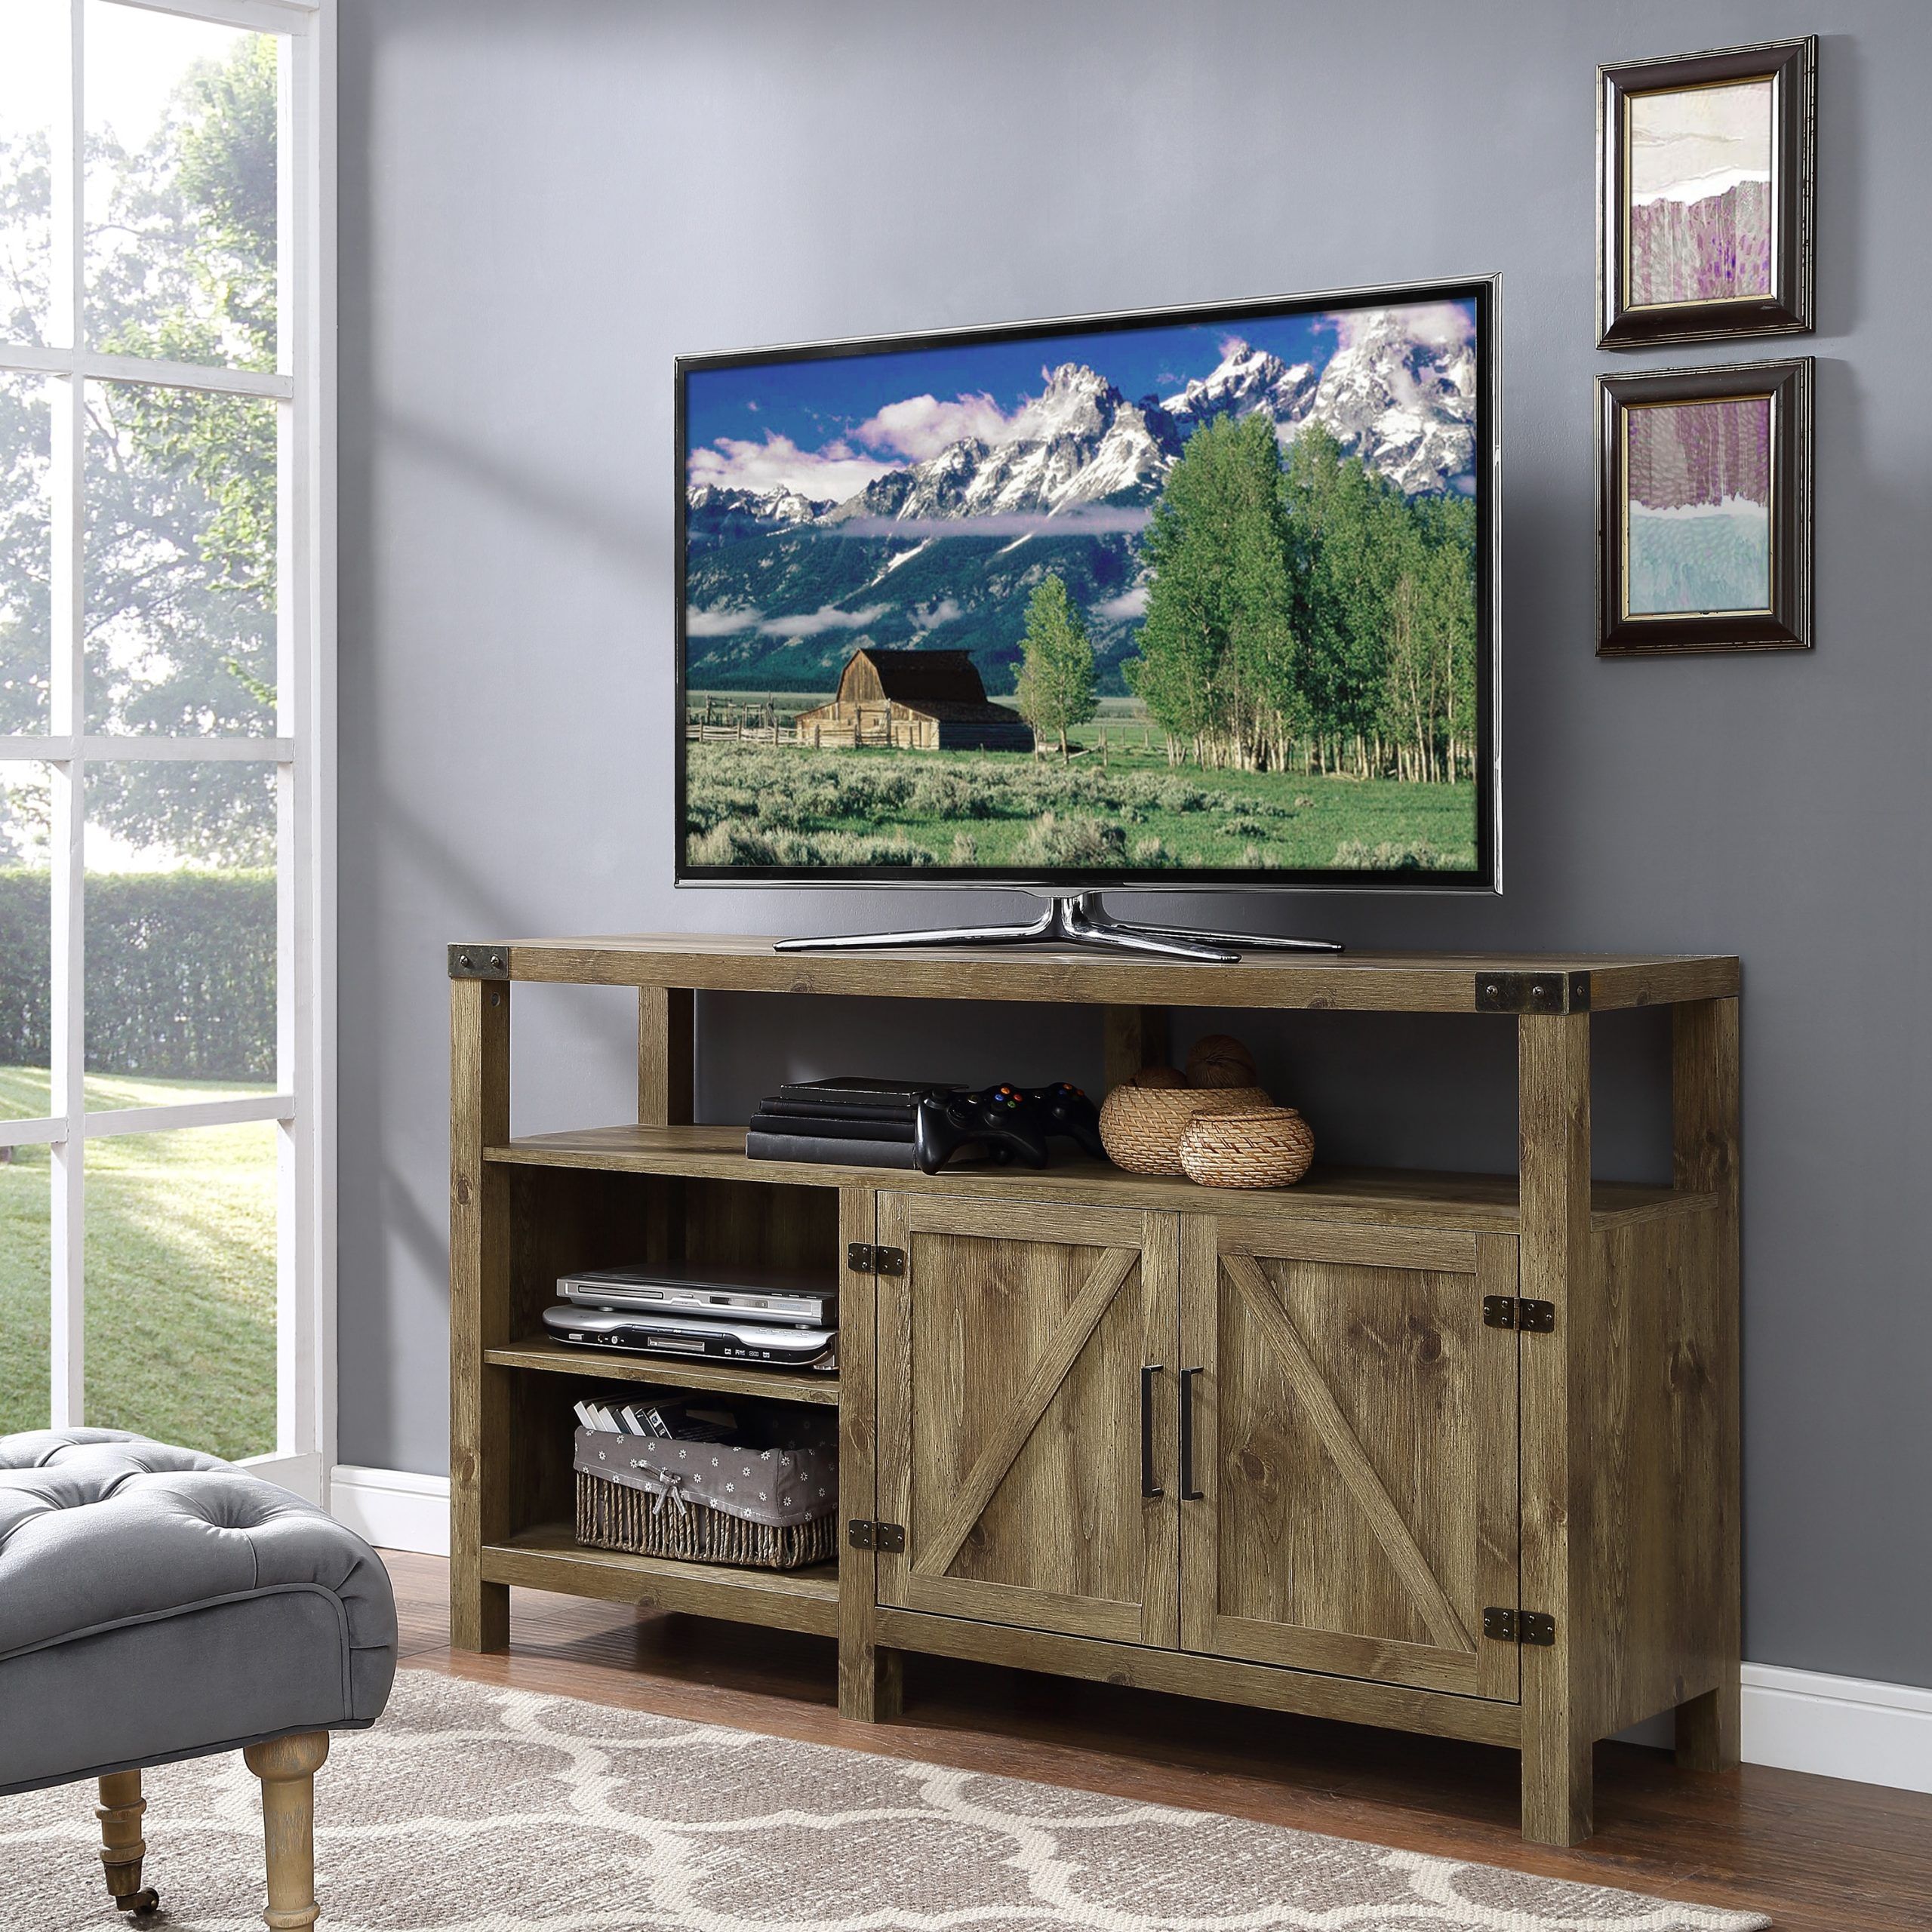 Farmhouse Tv Stand 70 Inch White : Coastal Tv Stands Beach Tv Stands Throughout Farmhouse Tv Stands For 70 Inch Tv (Gallery 14 of 20)